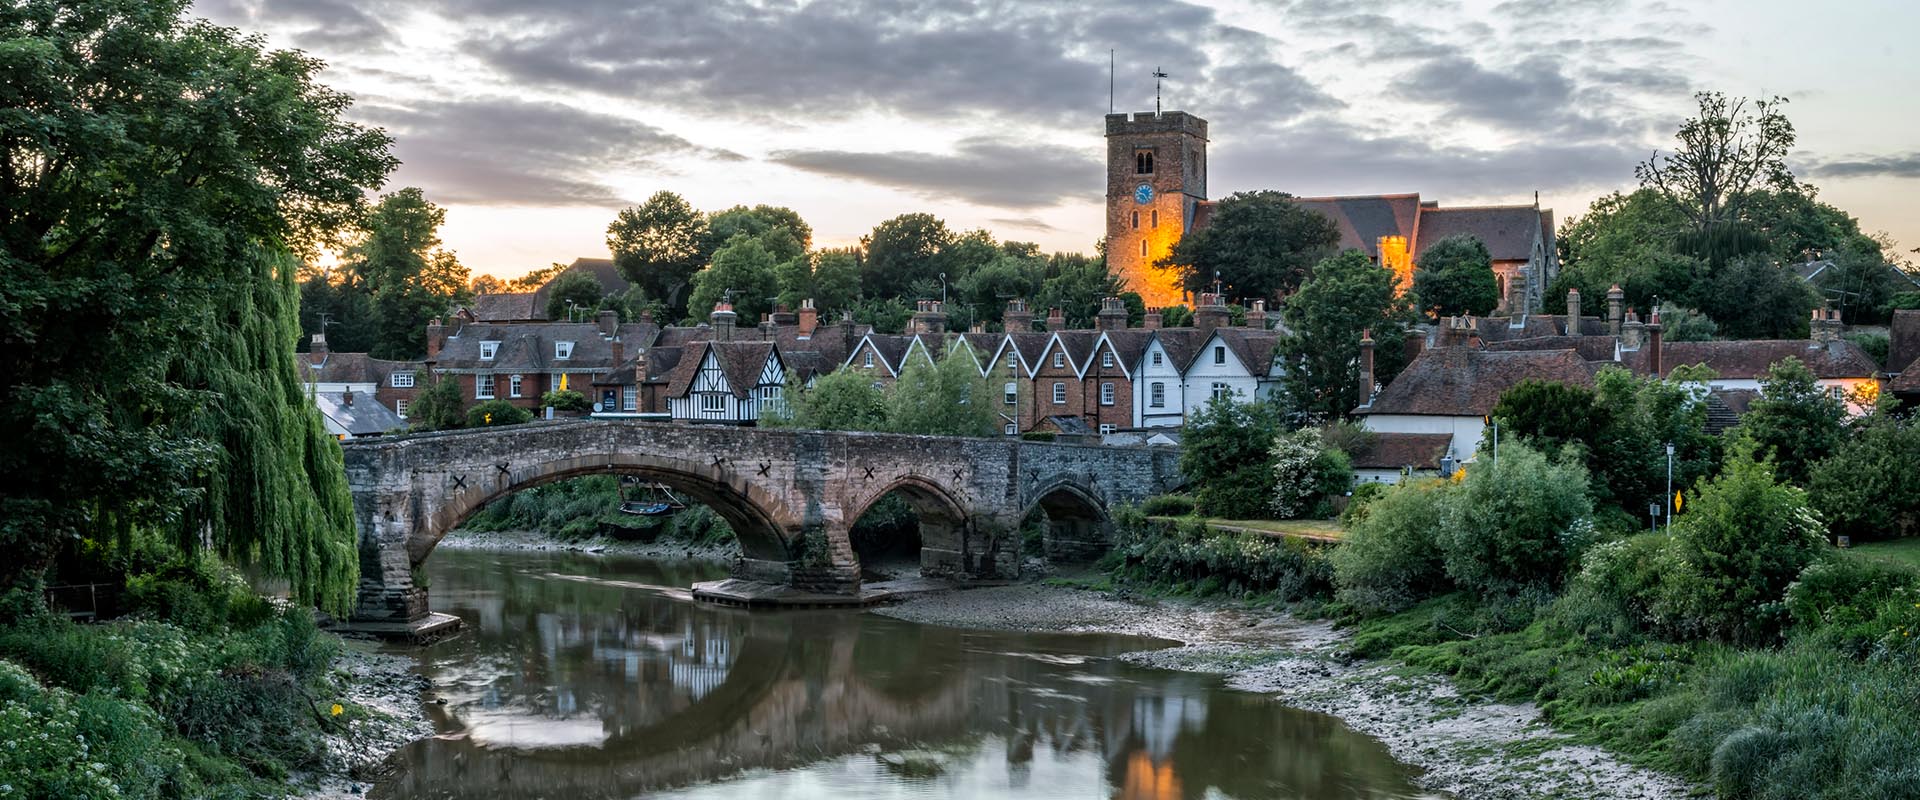 Aylesford village. Graham Colley Solicitor providing Will and Probate services in Aylesford